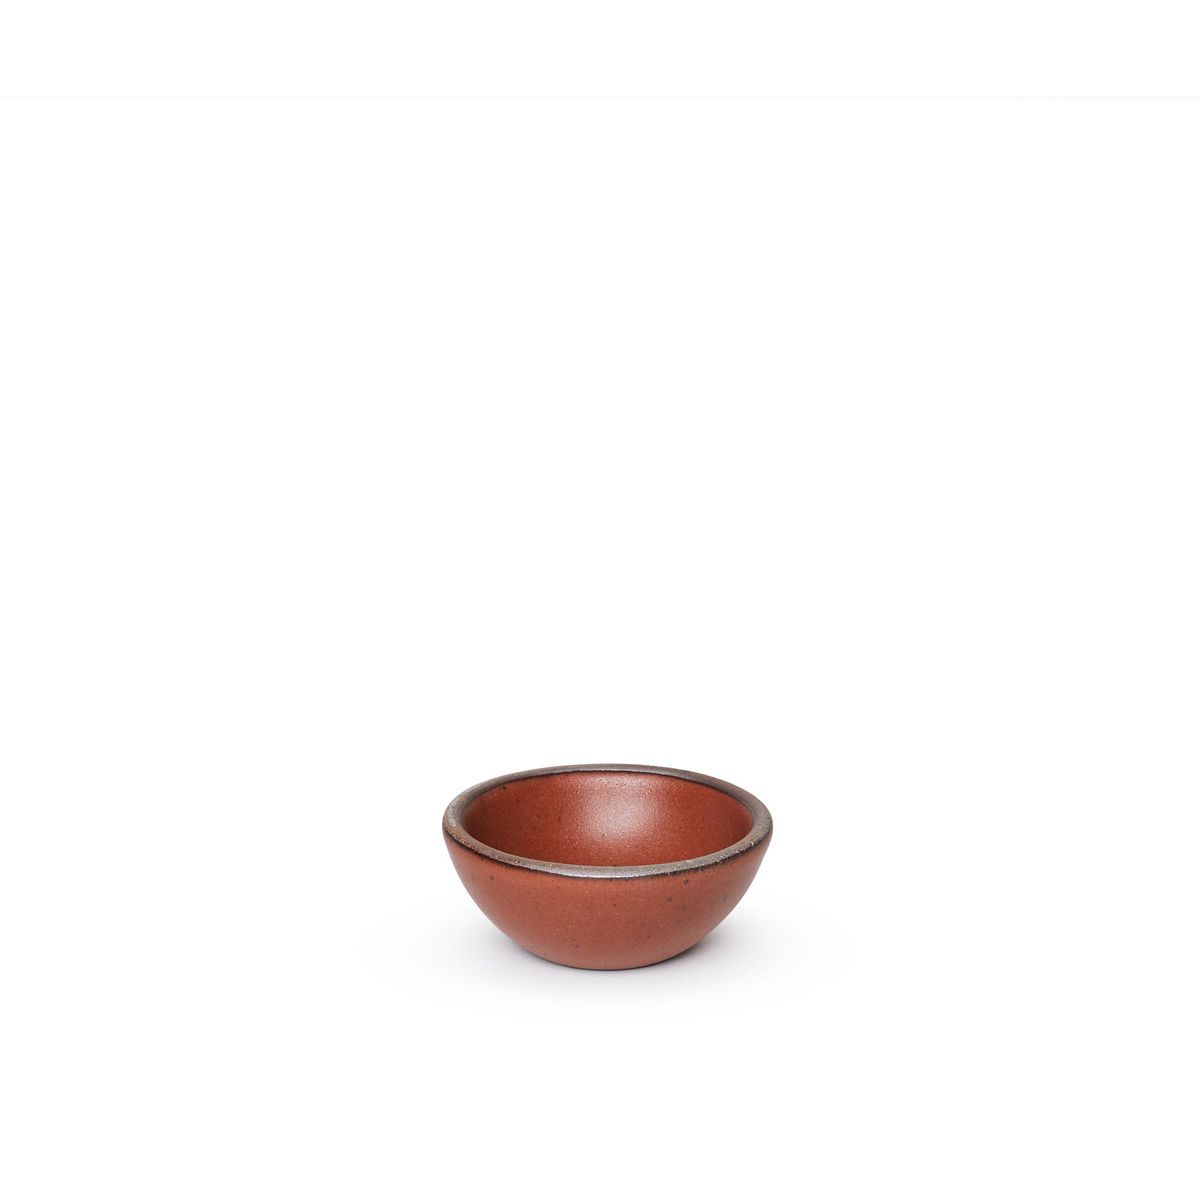 A tiny rounded ceramic bowl in a cool burnt terracotta color featuring iron speckles and an unglazed rim